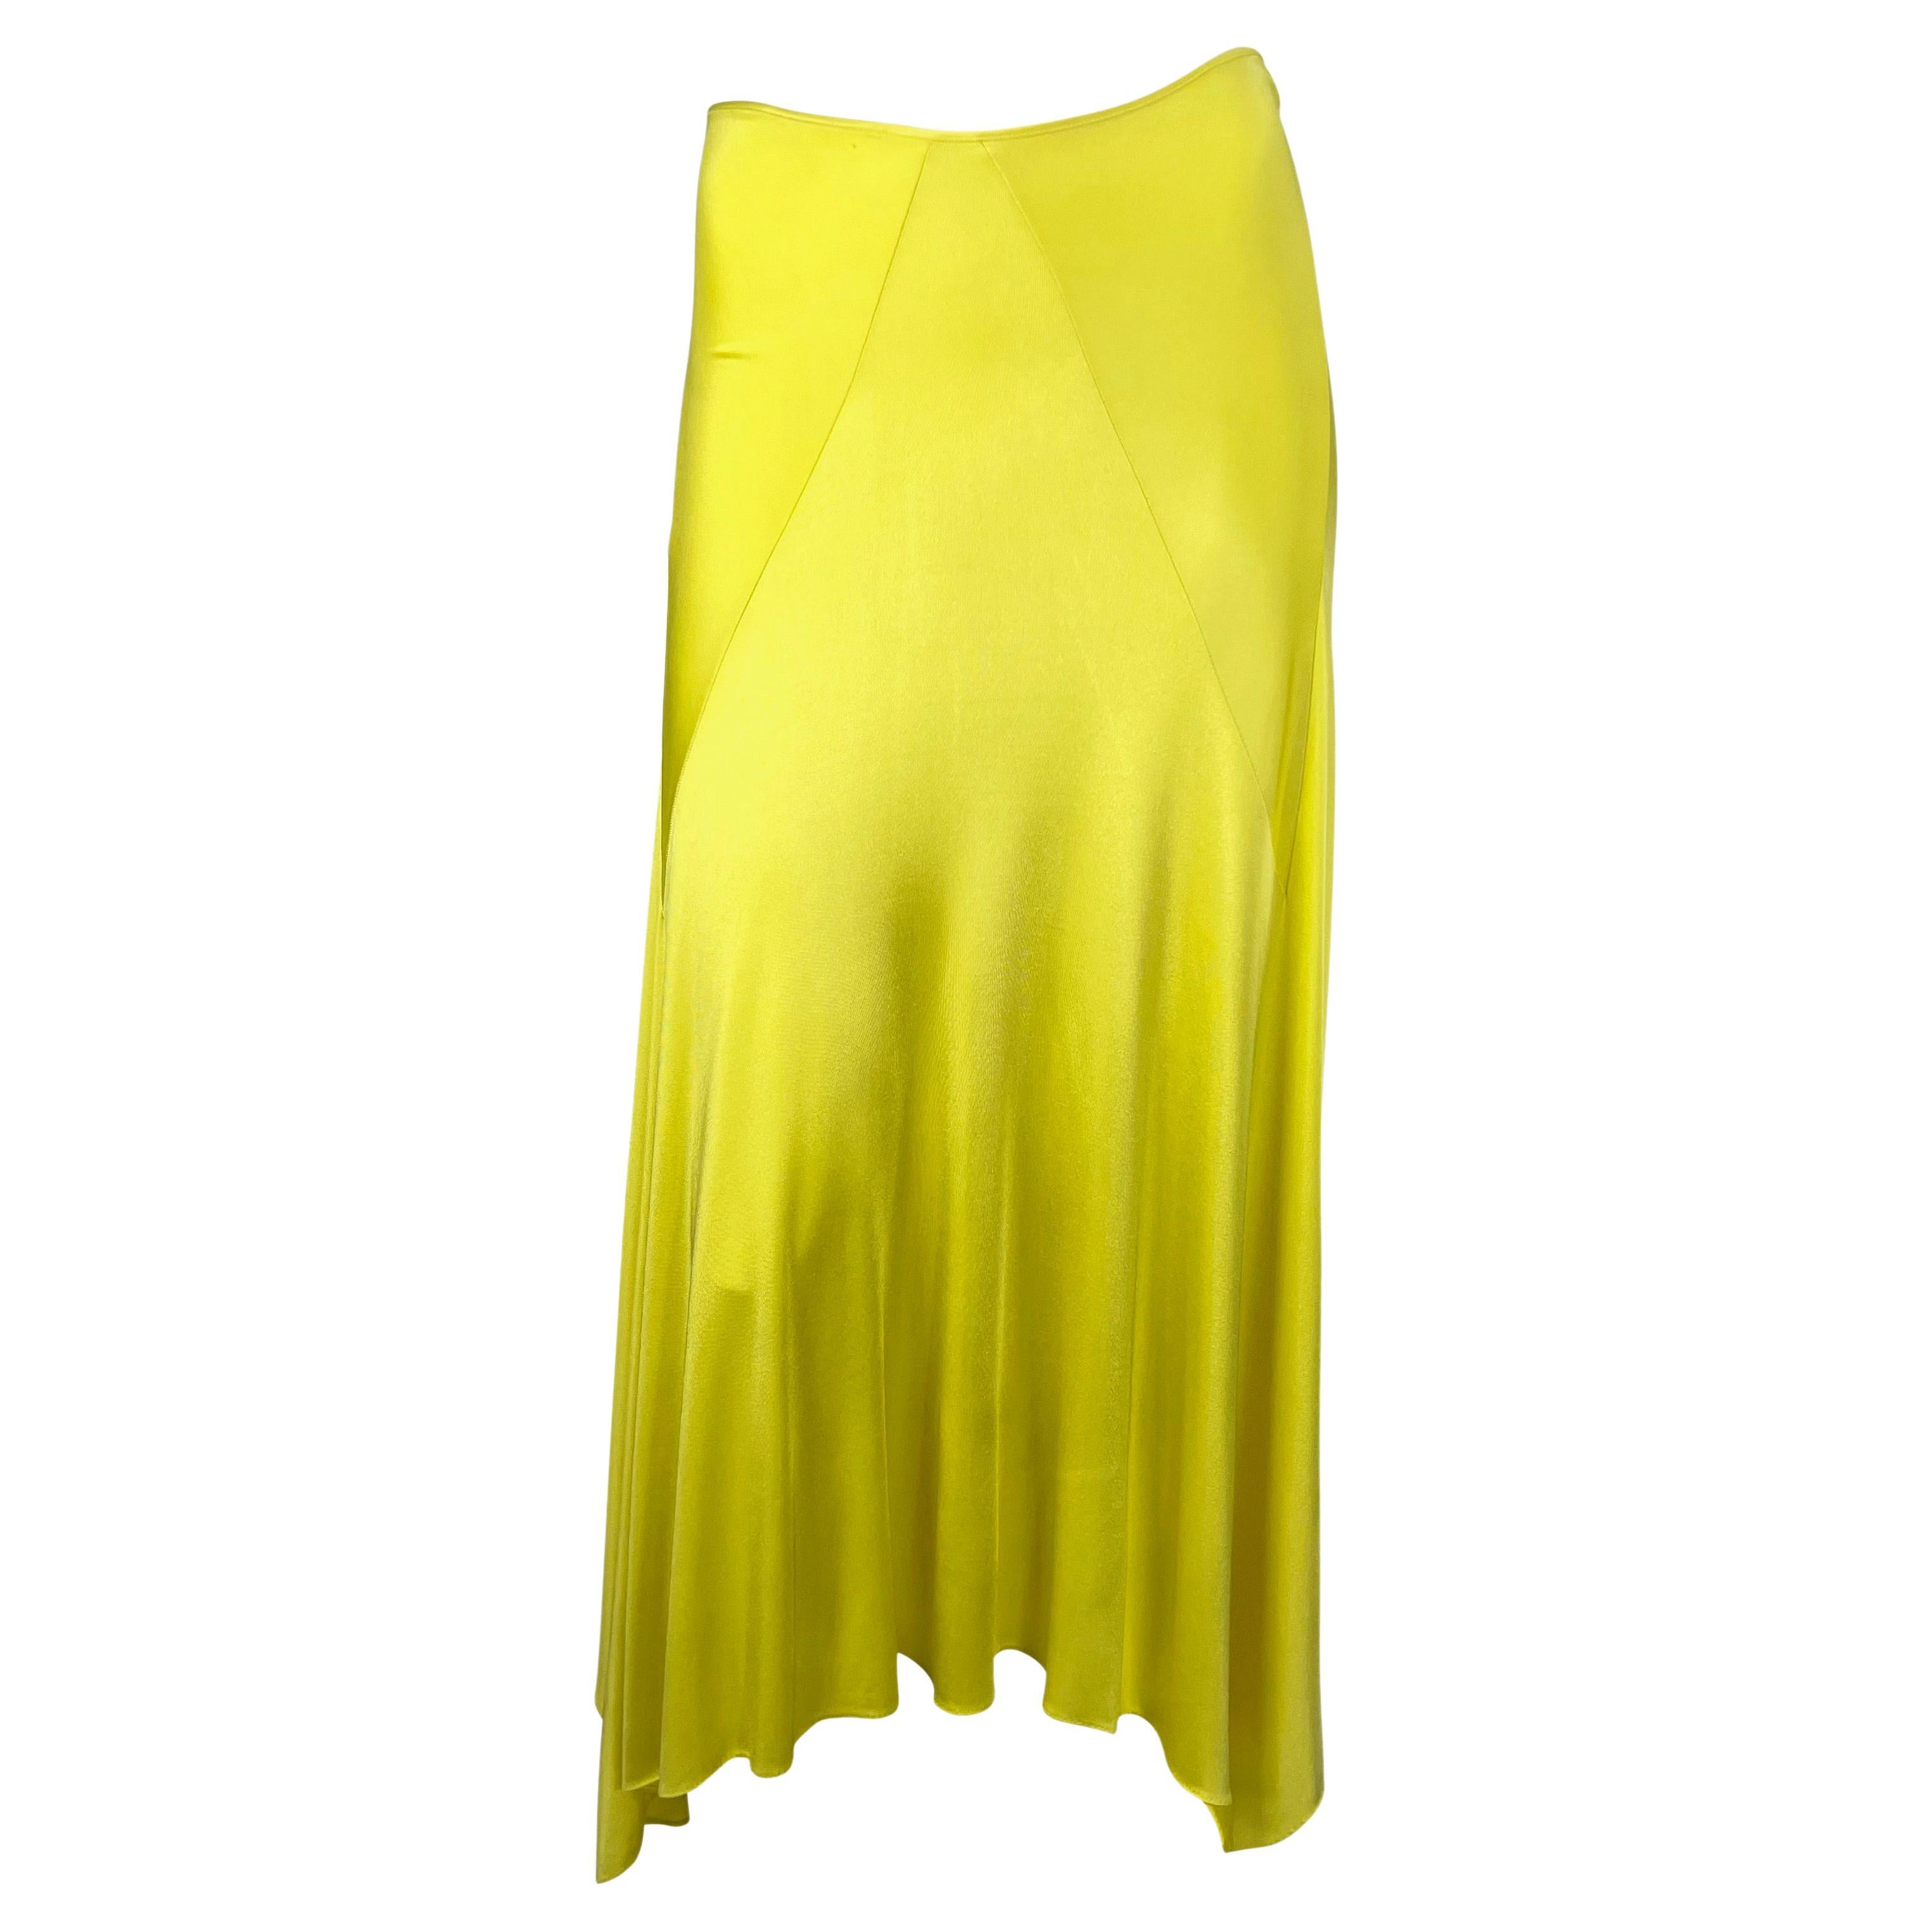 S/S 2004 Yves Saint Laurent by Tom Ford Canary Yellow Stretch Maxi Skirt